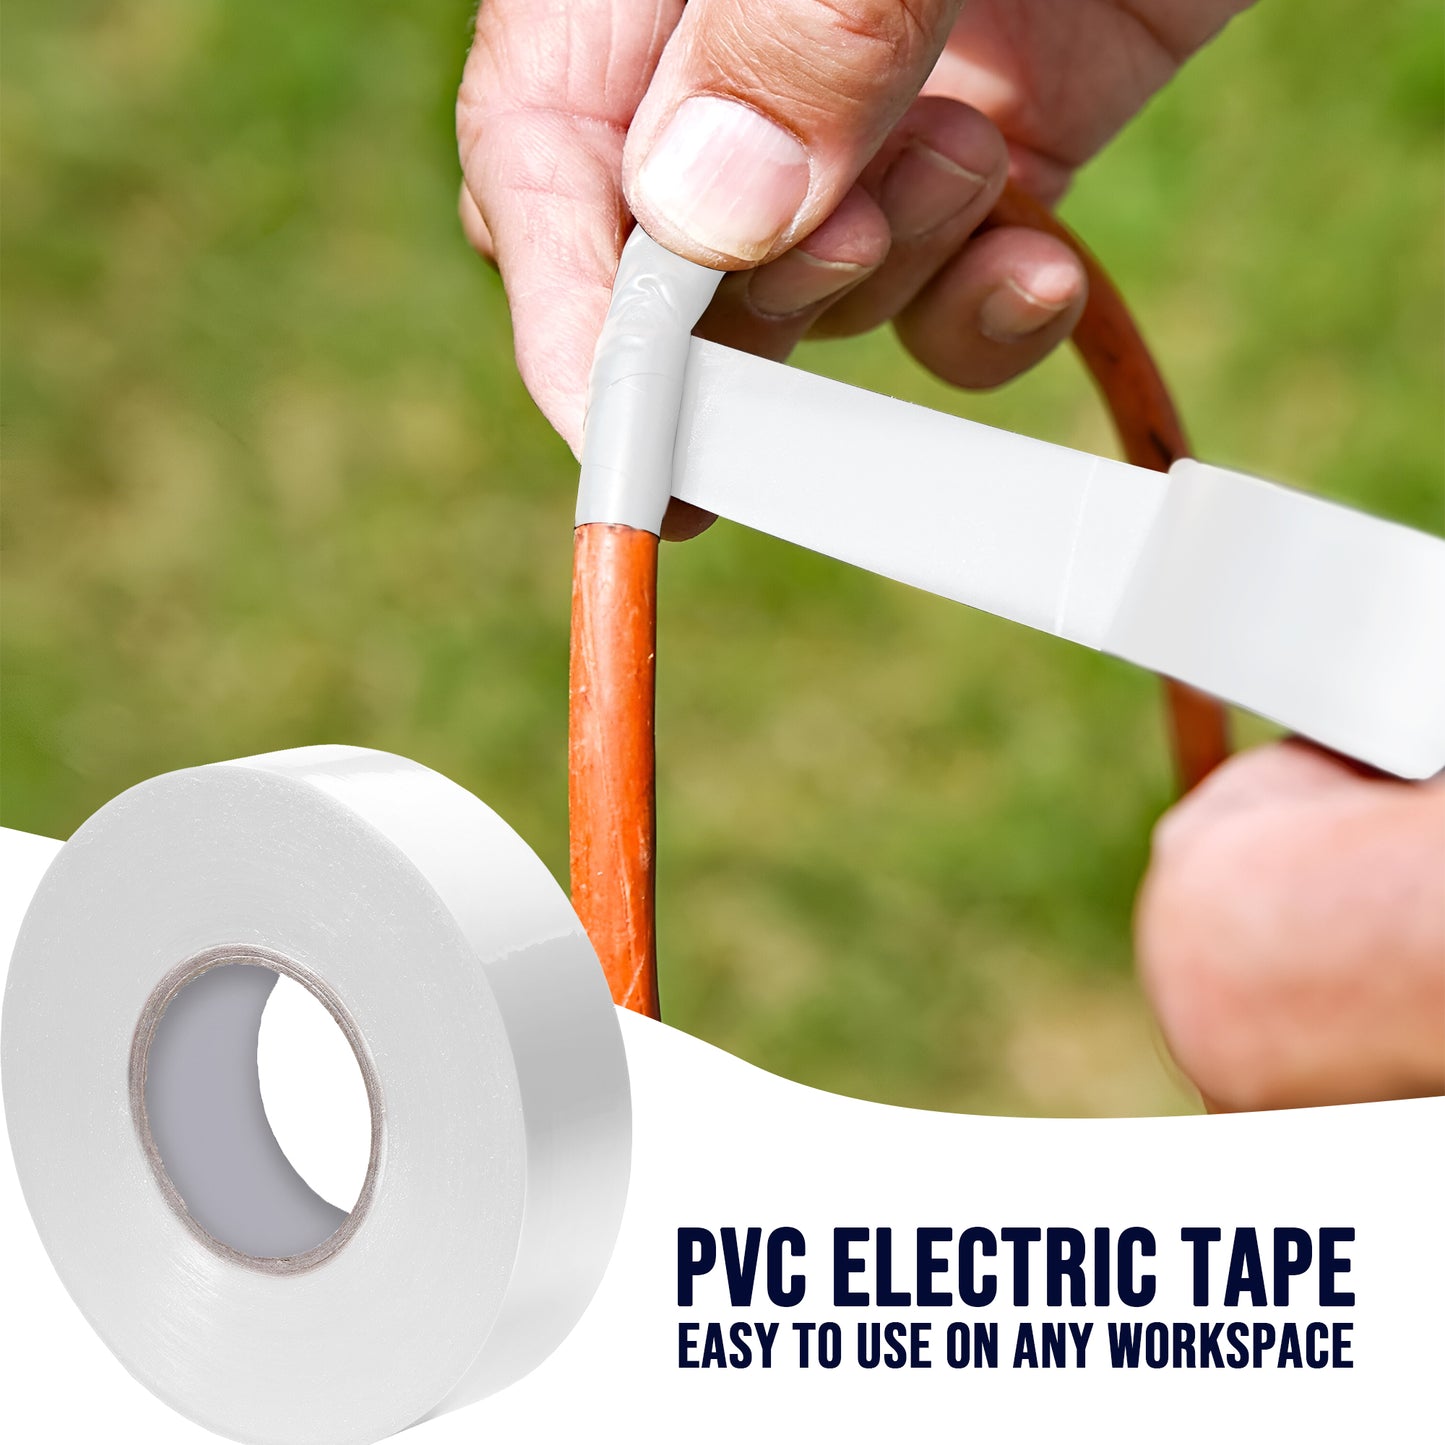 PVC Electrical Waterproof Insulating Tape